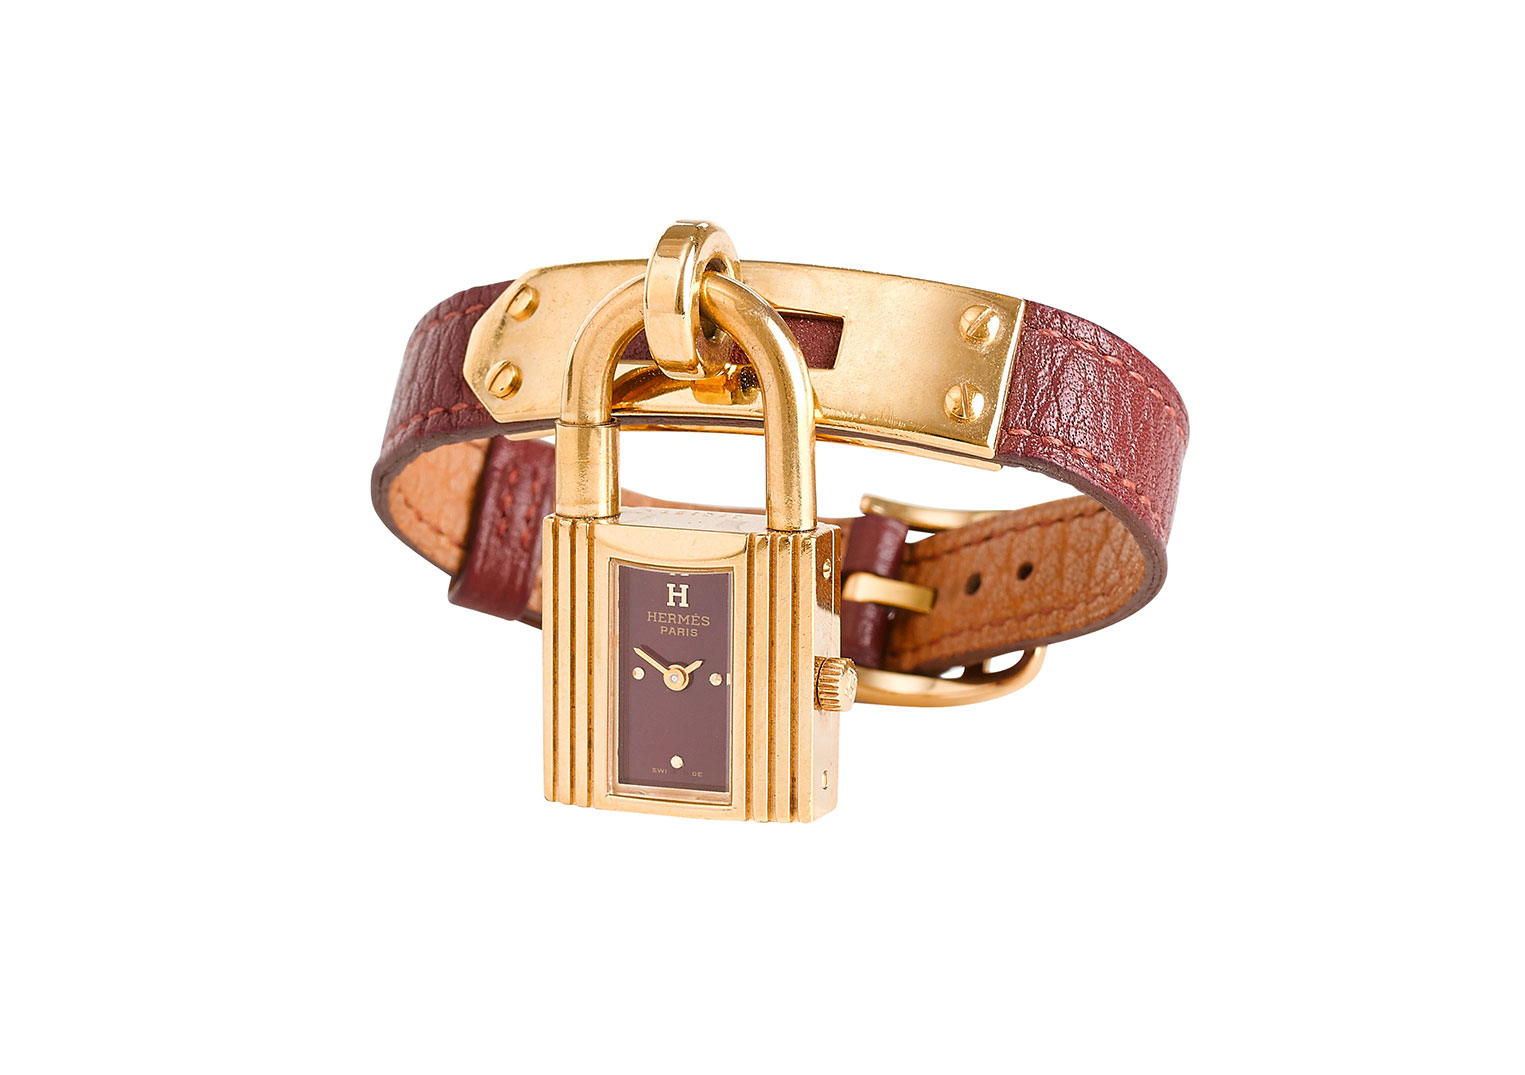 Vintage Hermes 'Kelly' Watch with Rouge H Chevre Leather Strap